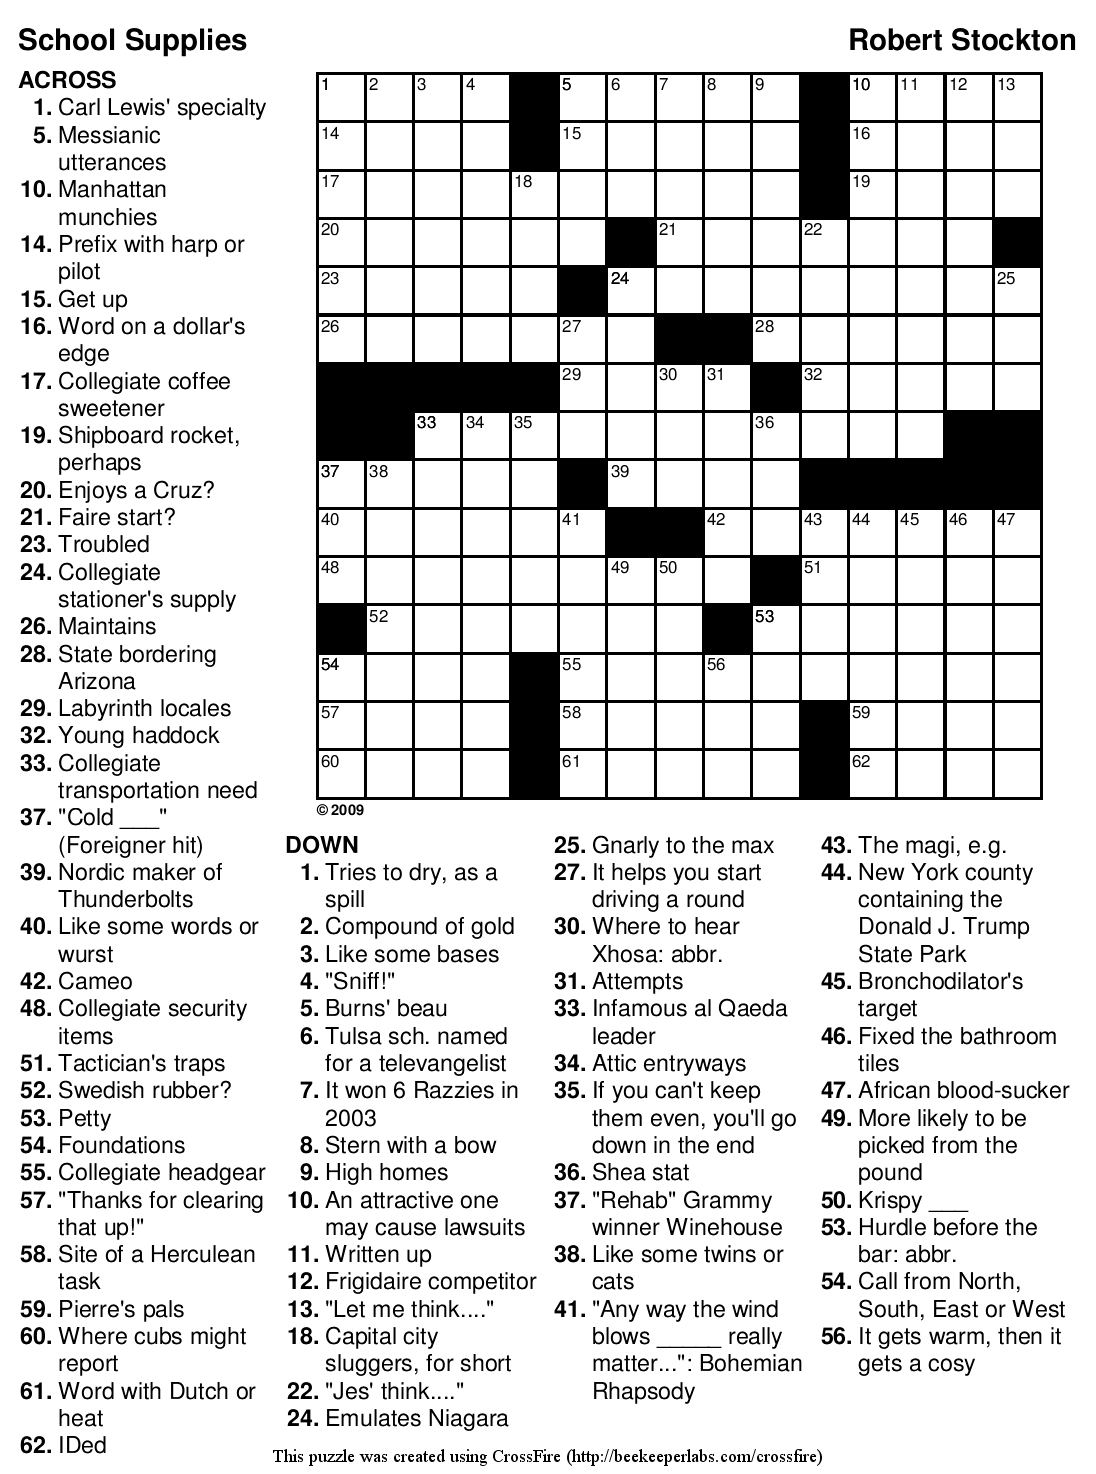 Easy Printable Crossword Puzzles | Crosswords Puzzles | Printable - Free Printable Crossword Puzzles Easy For Adults